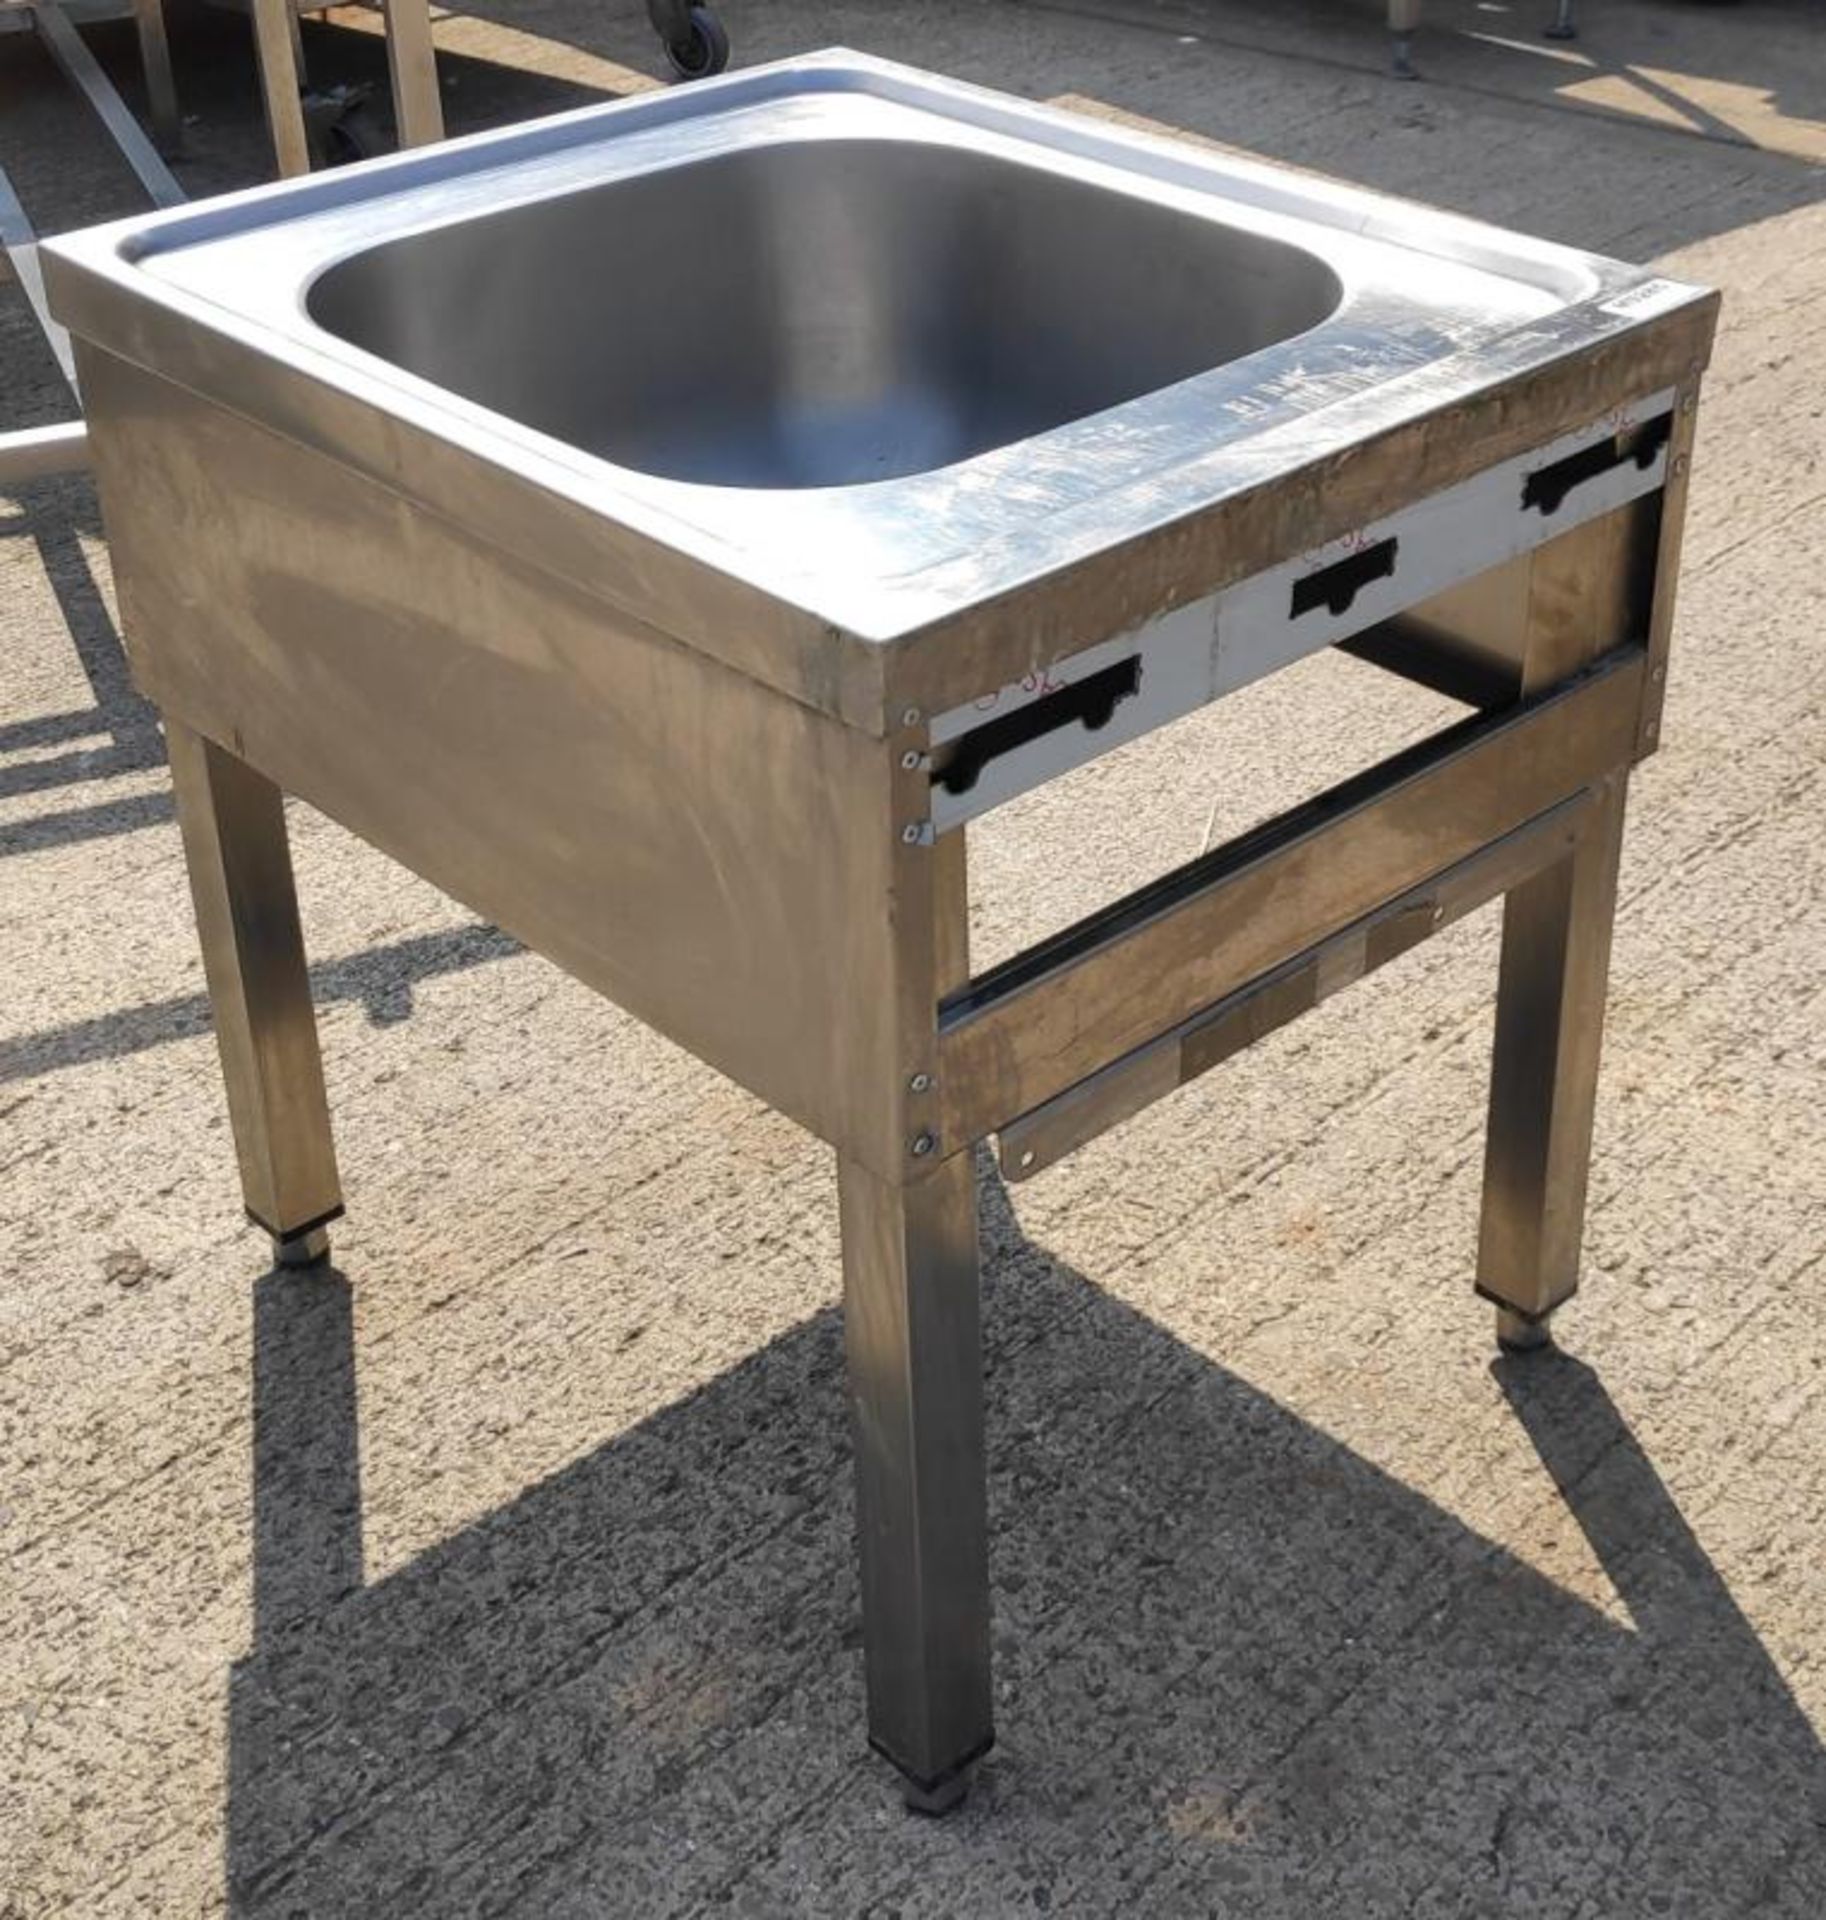 1 x Low Stainless Steel Commercial Kitchen Sink Unit - Dimensions: 50W x 60D x 60H cm - Very Recentl - Image 4 of 6